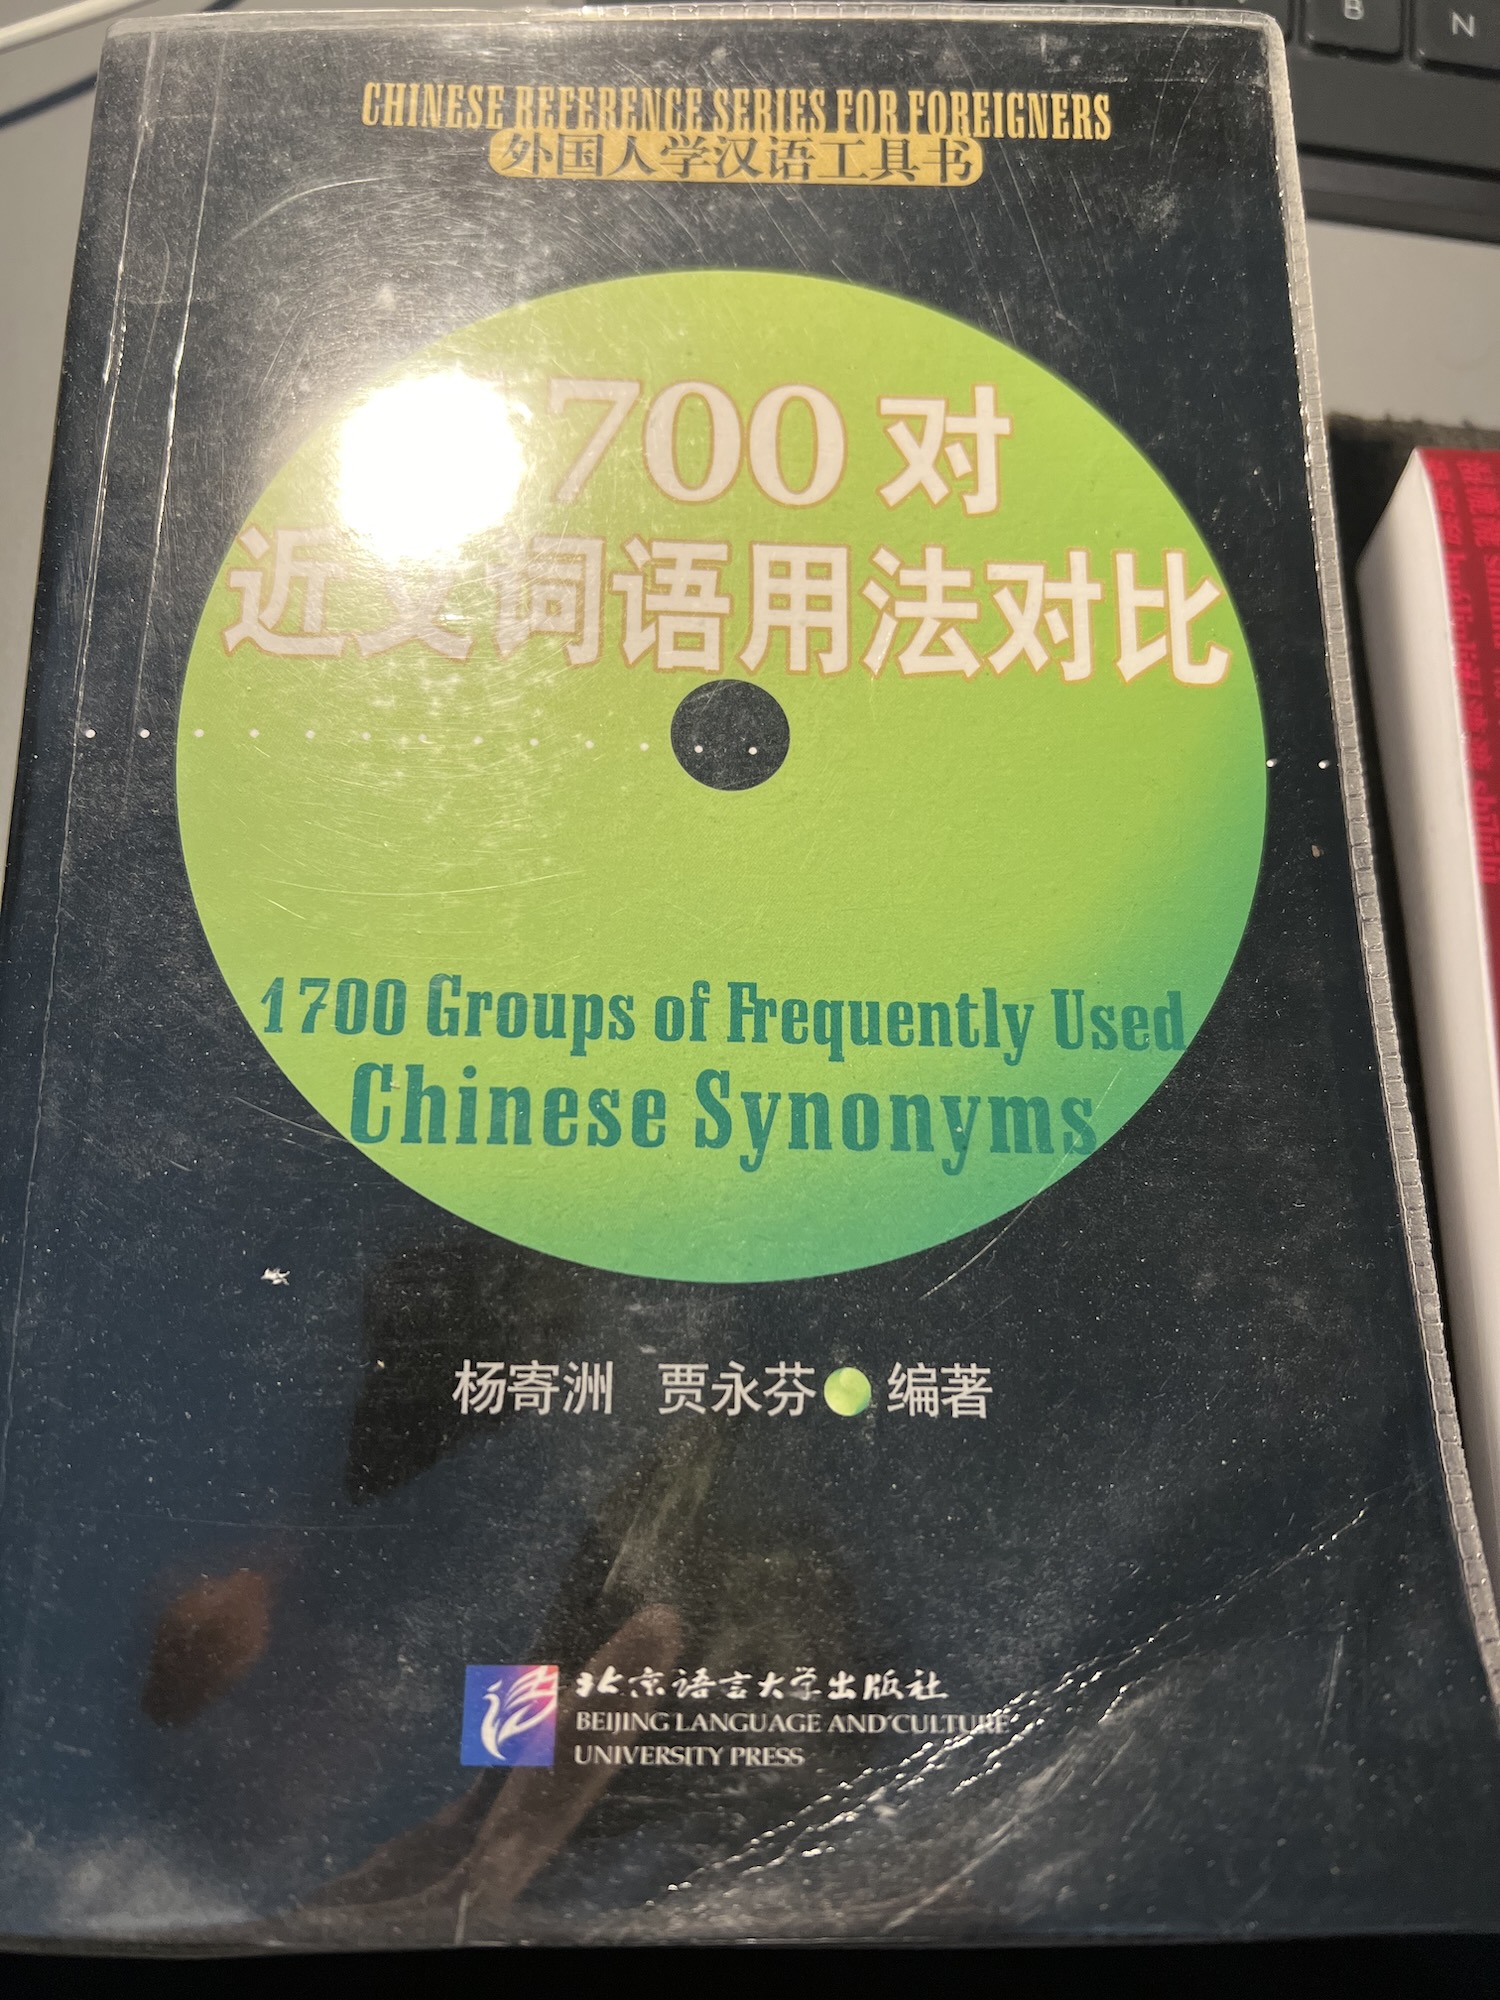 1700 Groups of Frequently Used Chinese Synonyms.jpeg